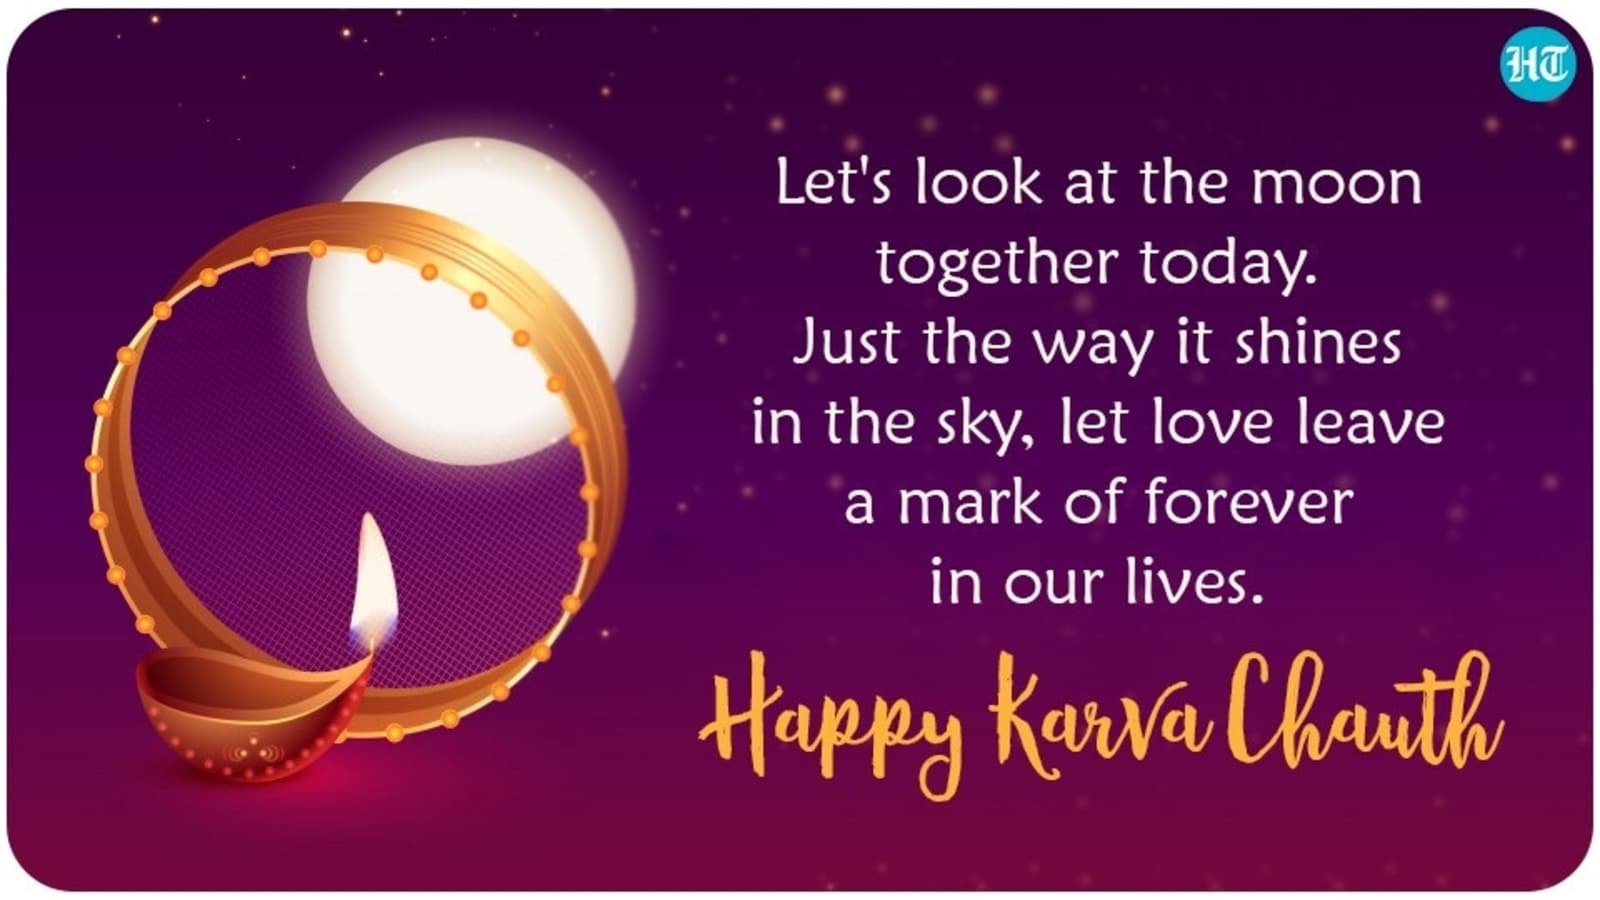 Happy Karwa Chauth 2022 Wishes Images Quotes Status Messages Photos HD  Wallpaper GIF Pics in Hindi Karva Chauth Wishes Images Quotes Messages   लइफसटइल News Times Now Navbharat